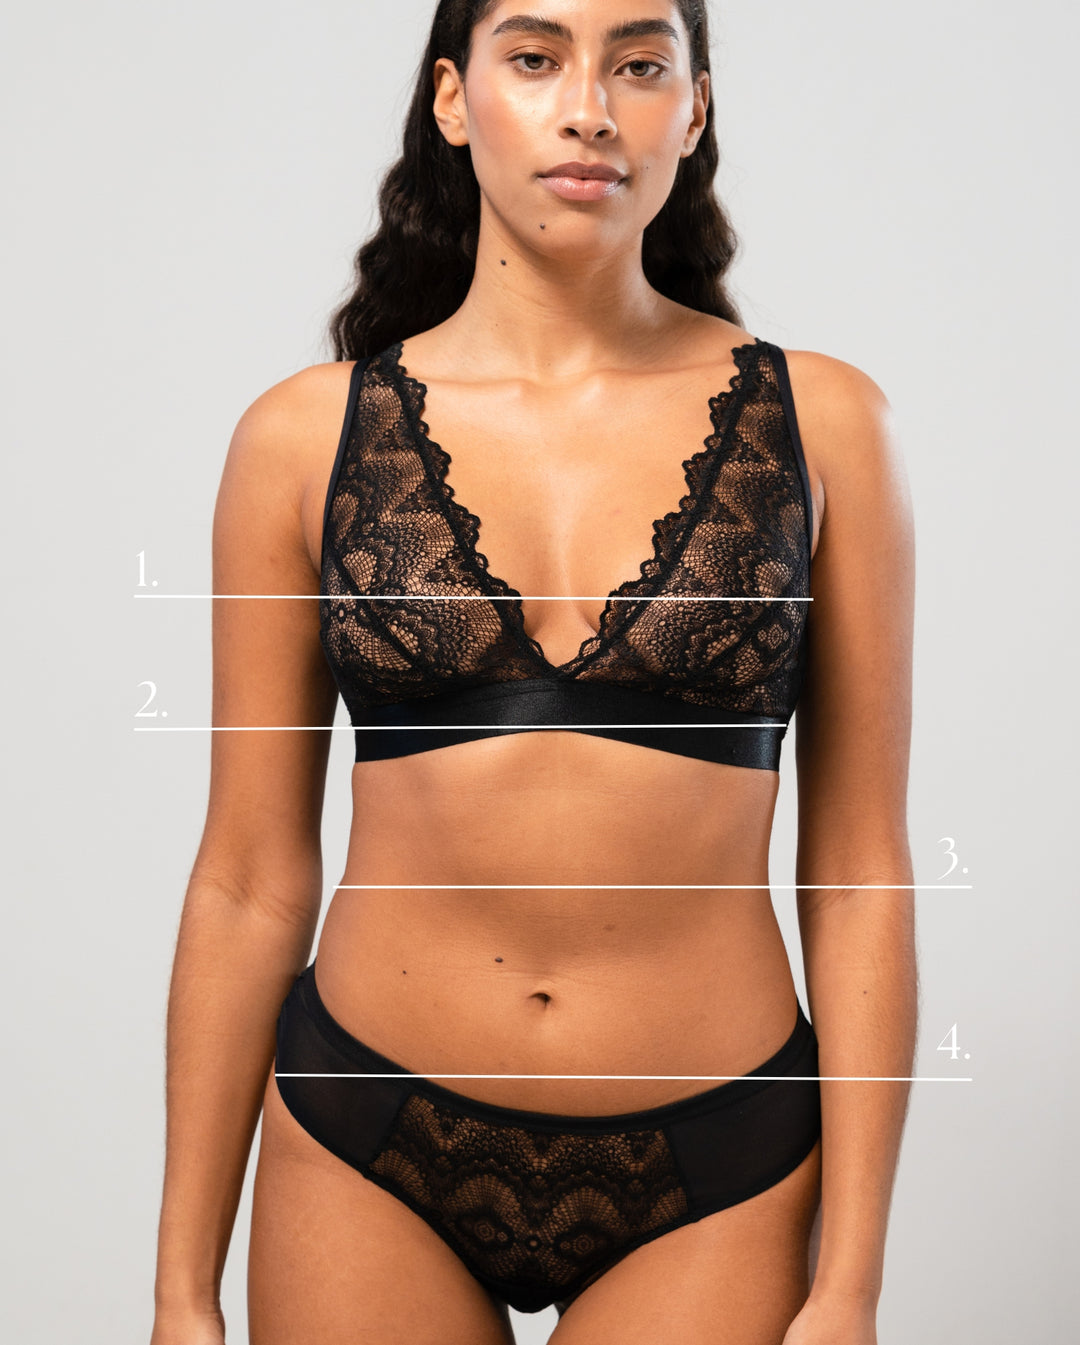 Wholesale european bra sizes to us For Supportive Underwear 